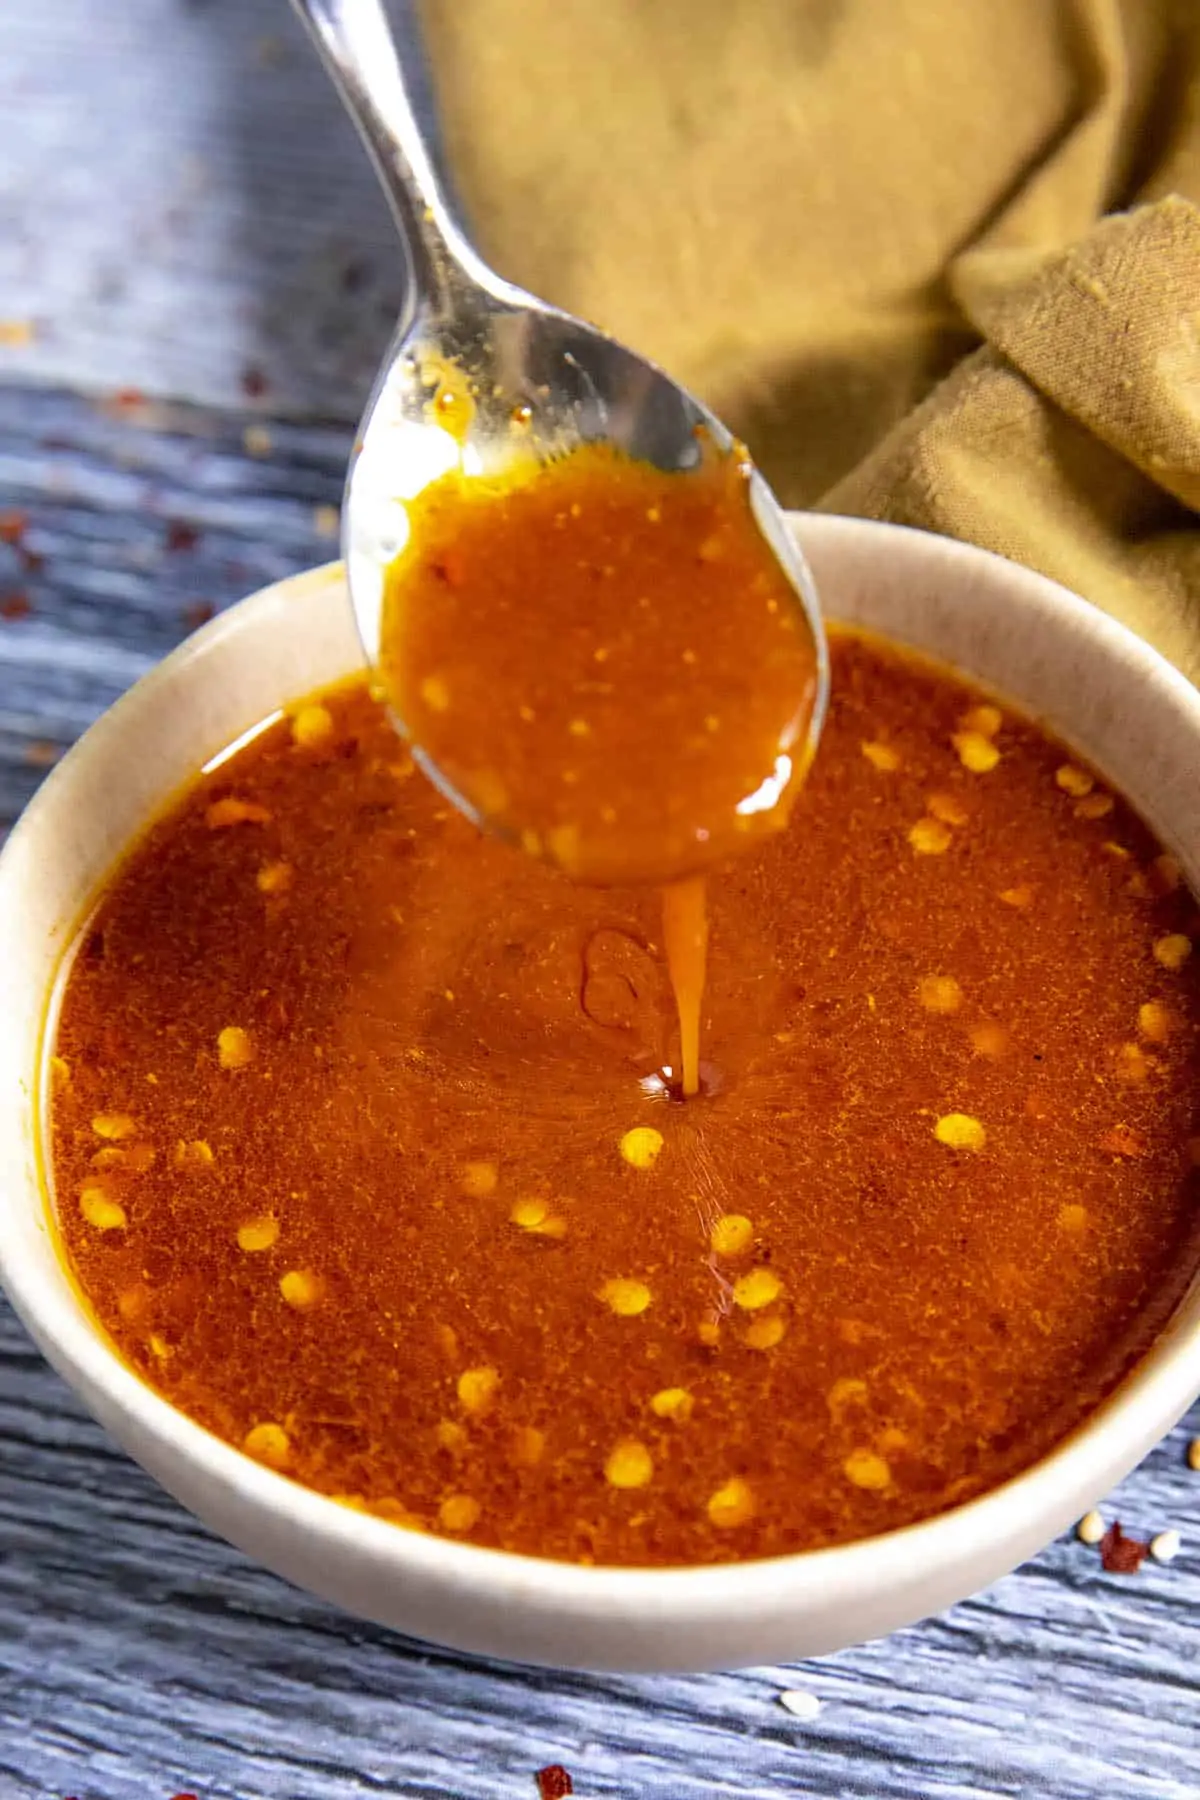 Stir Fry Sauce dripping from a spoon